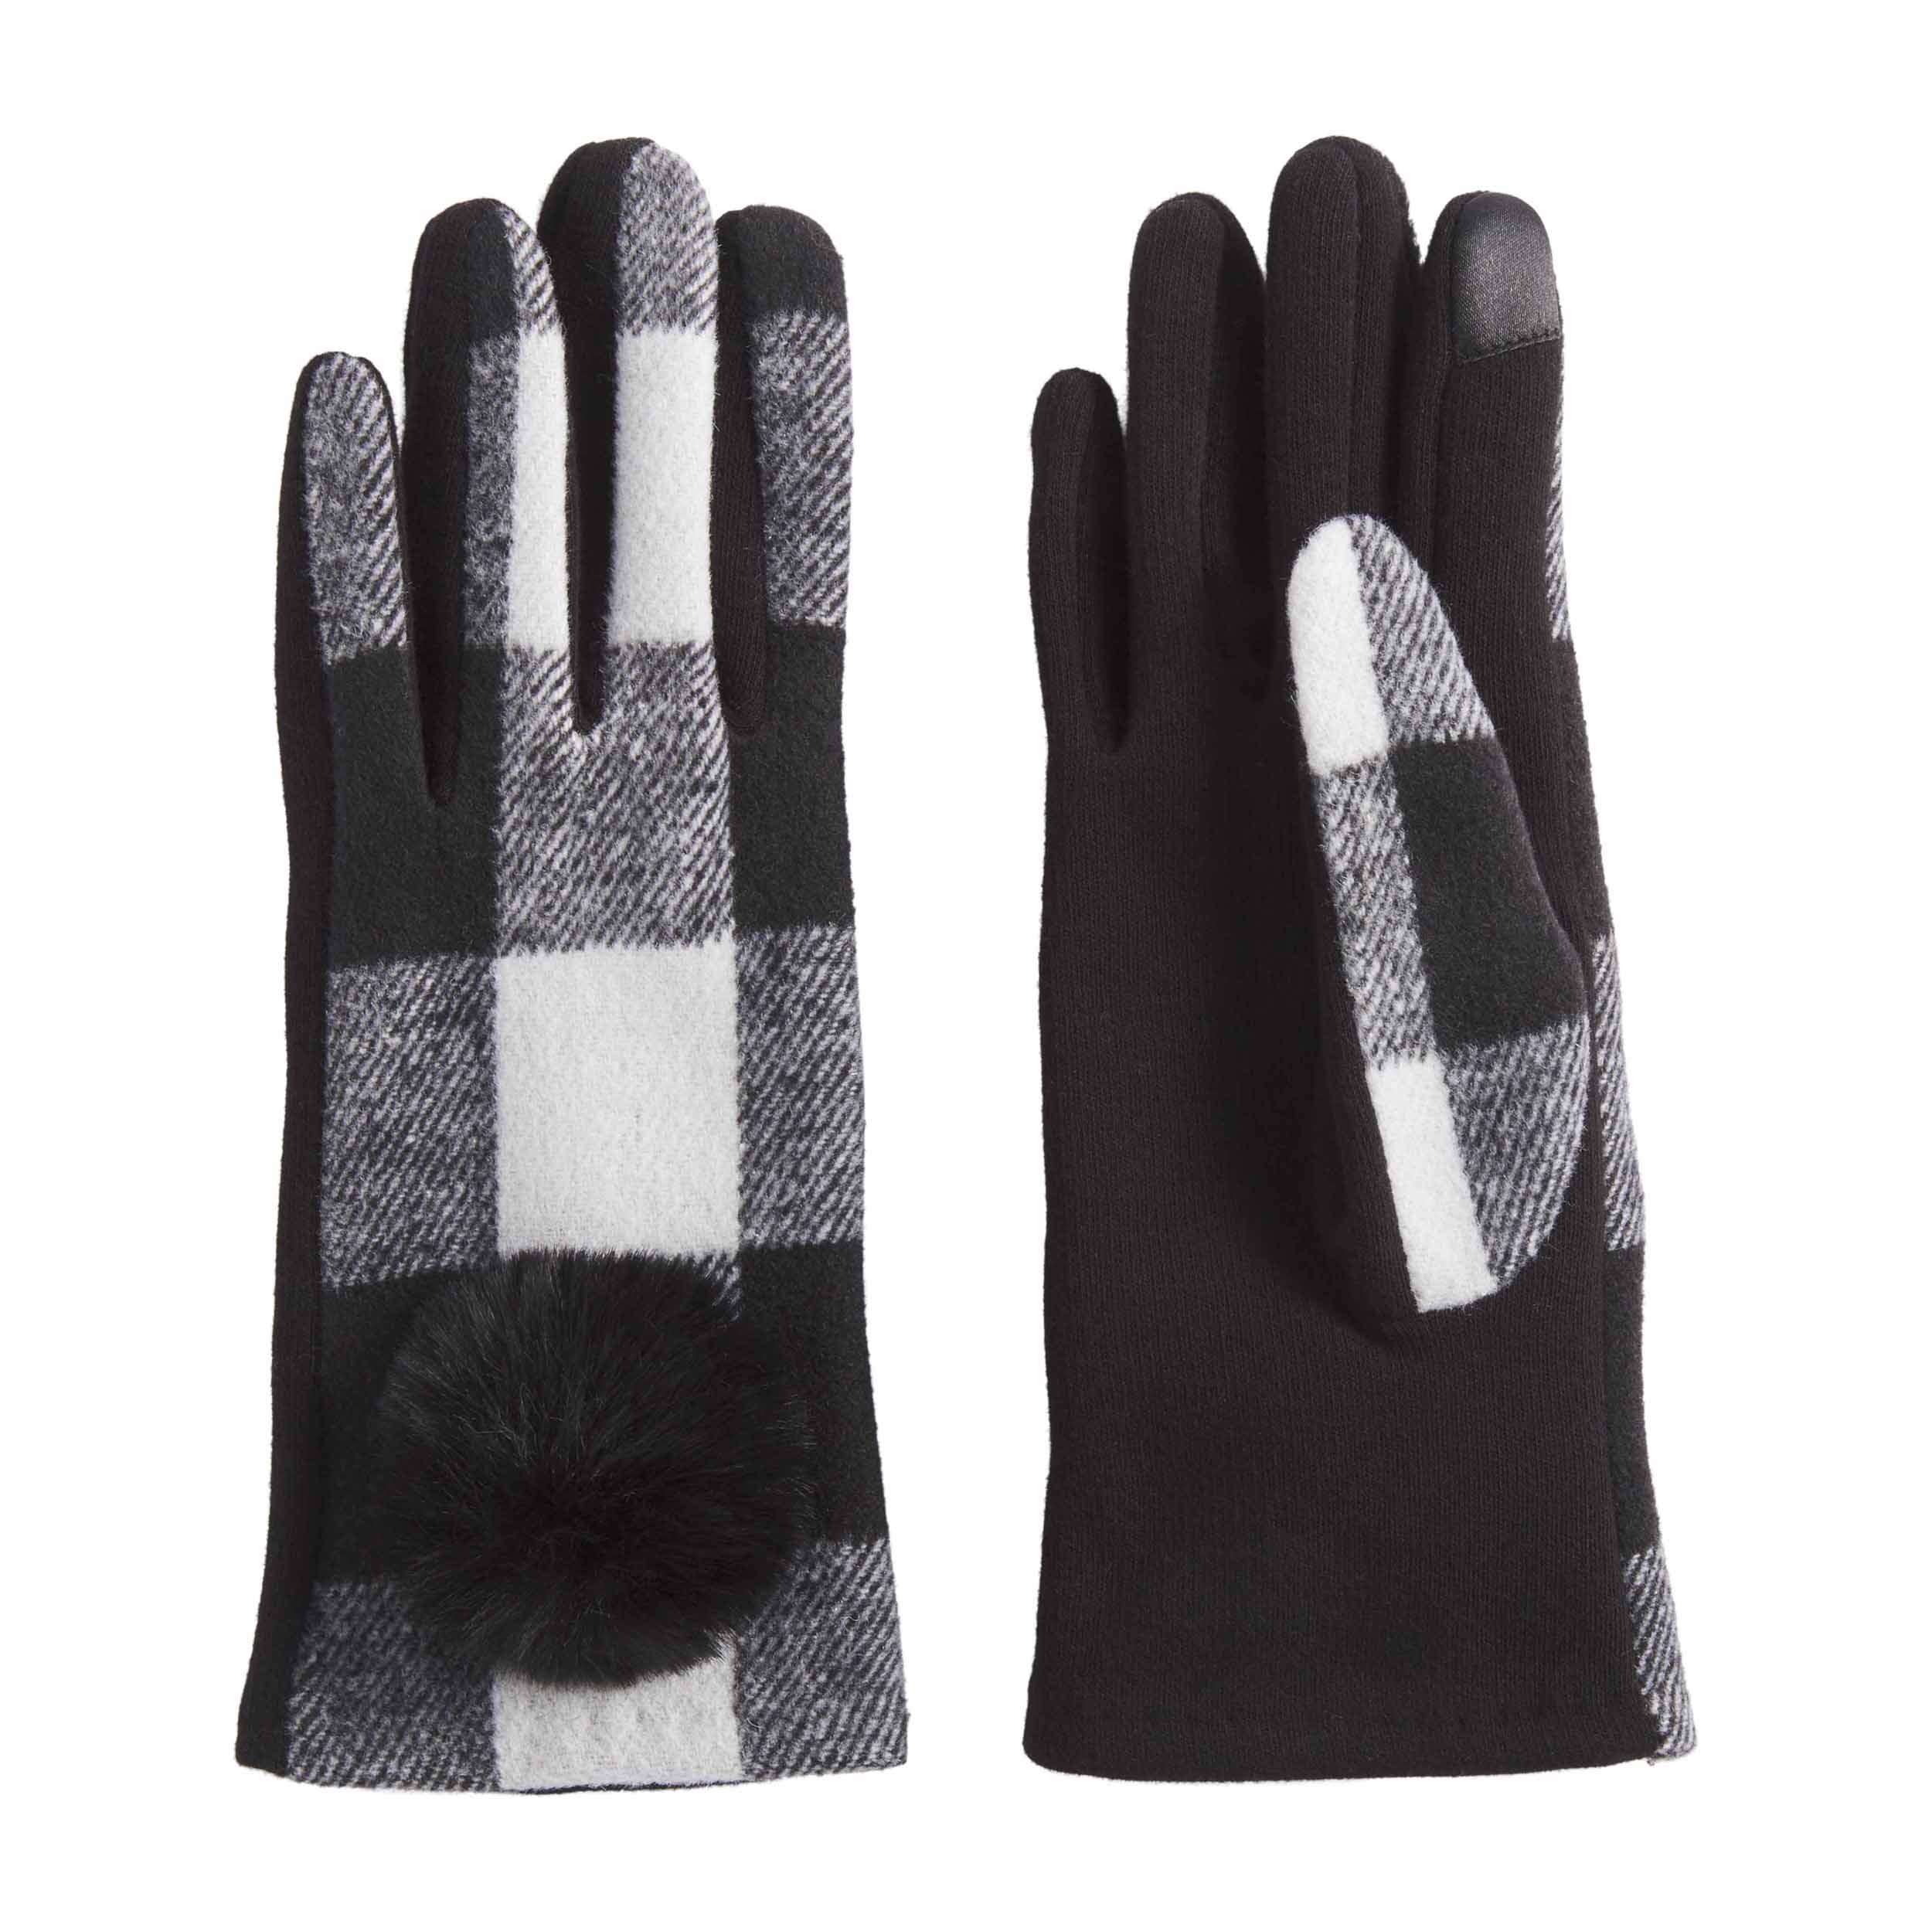 Mudpie Buffalo Check Poof Gloves